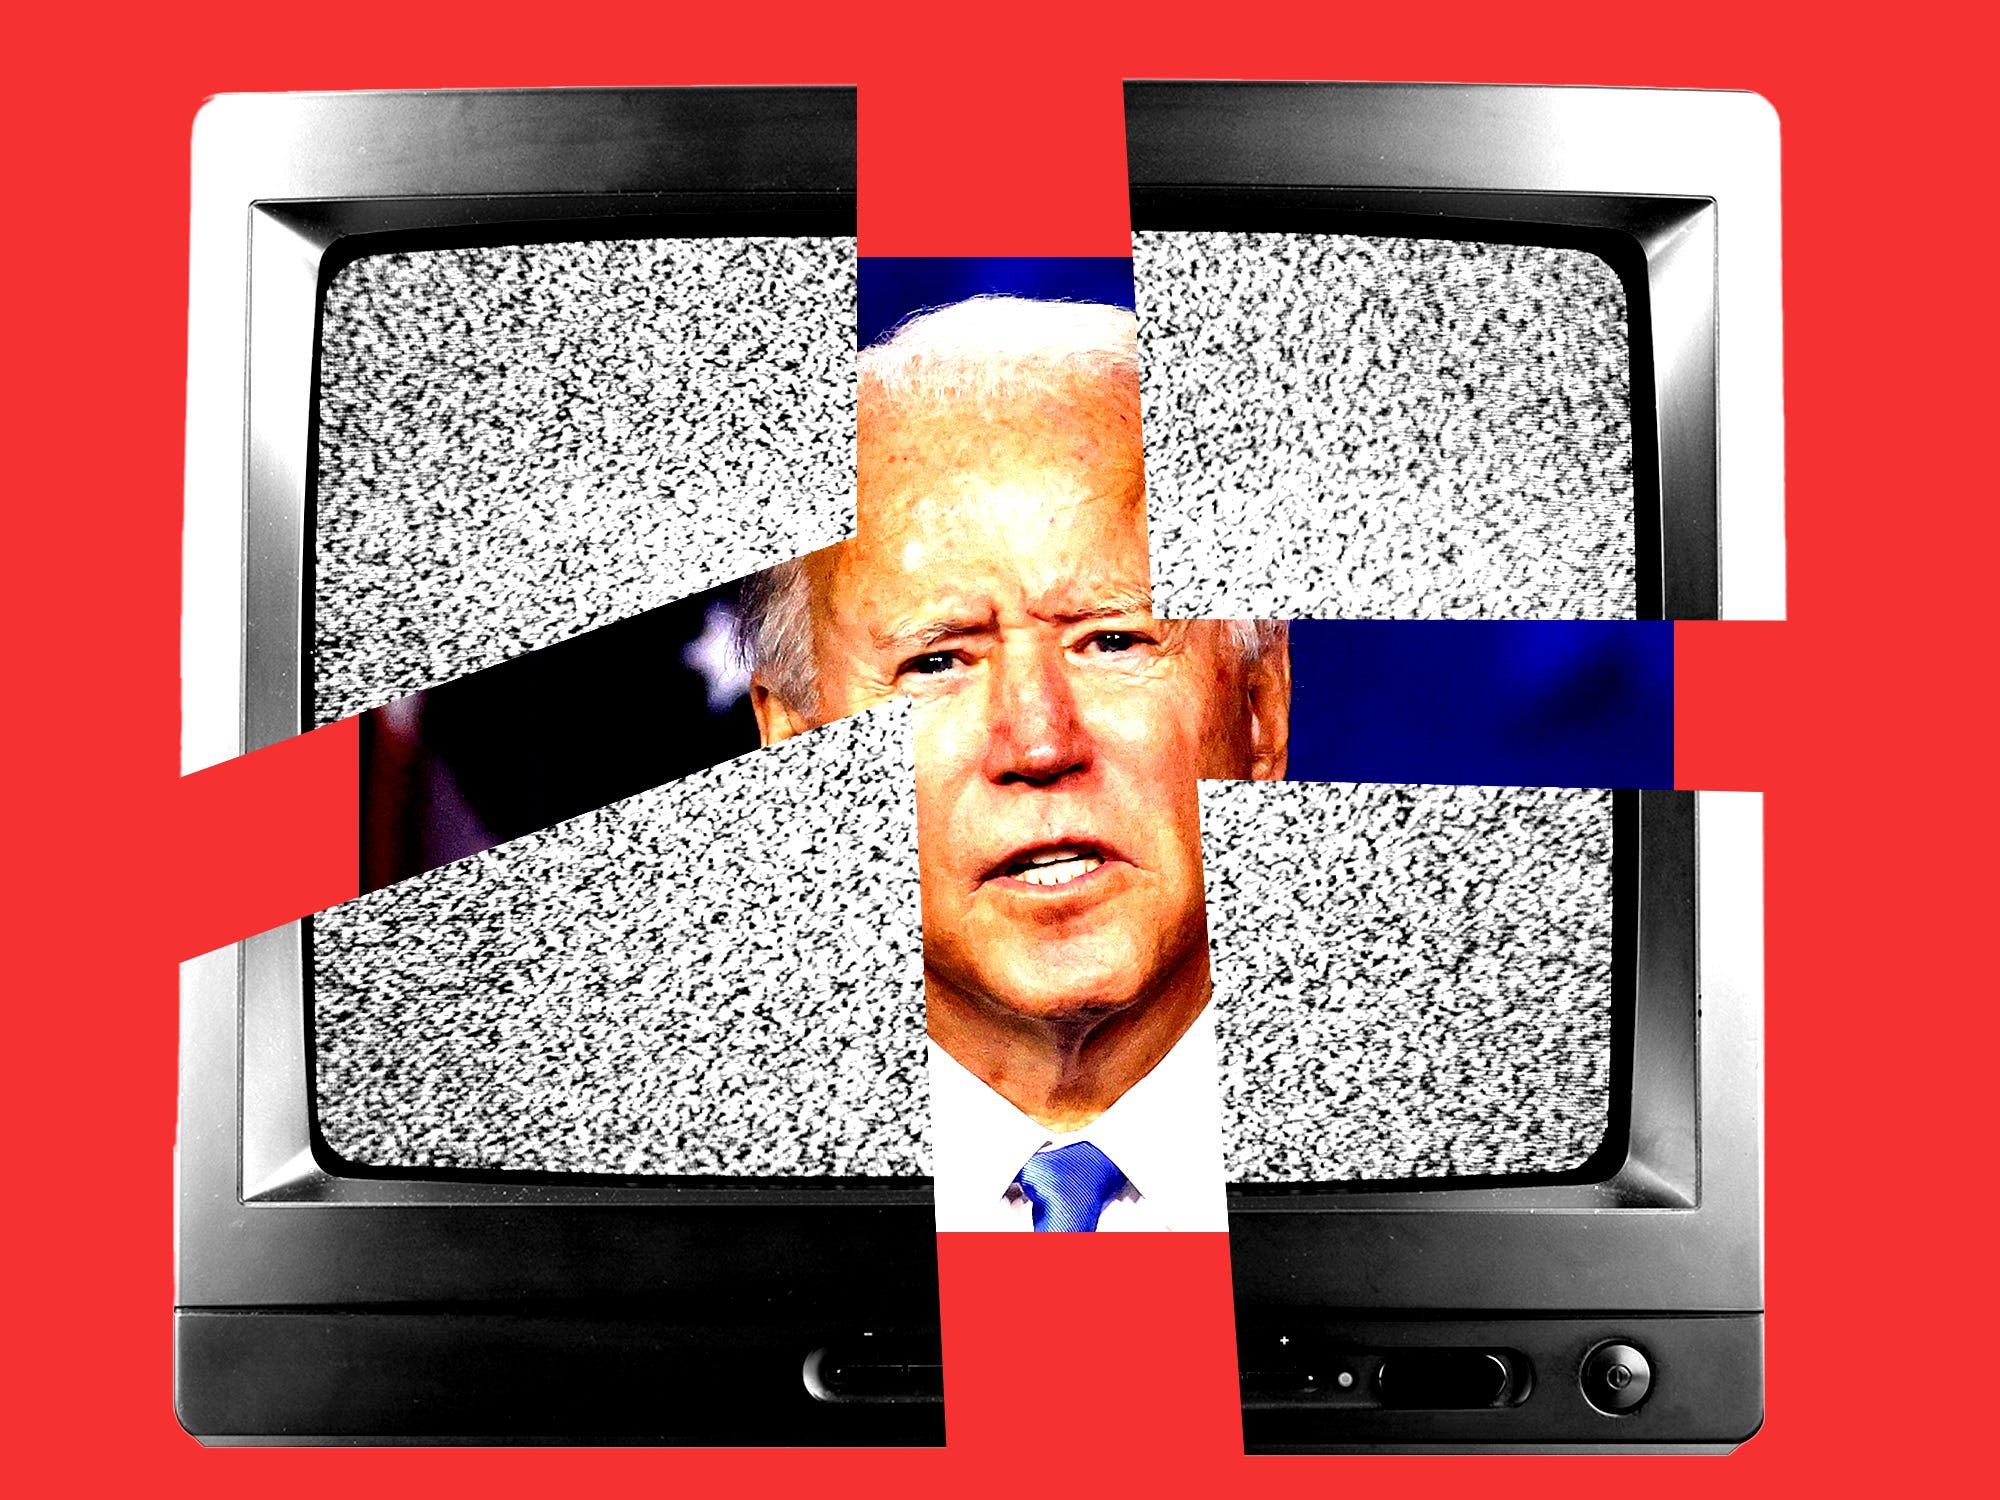 5 takeaways from Biden's first interview following his disastrous debate performance